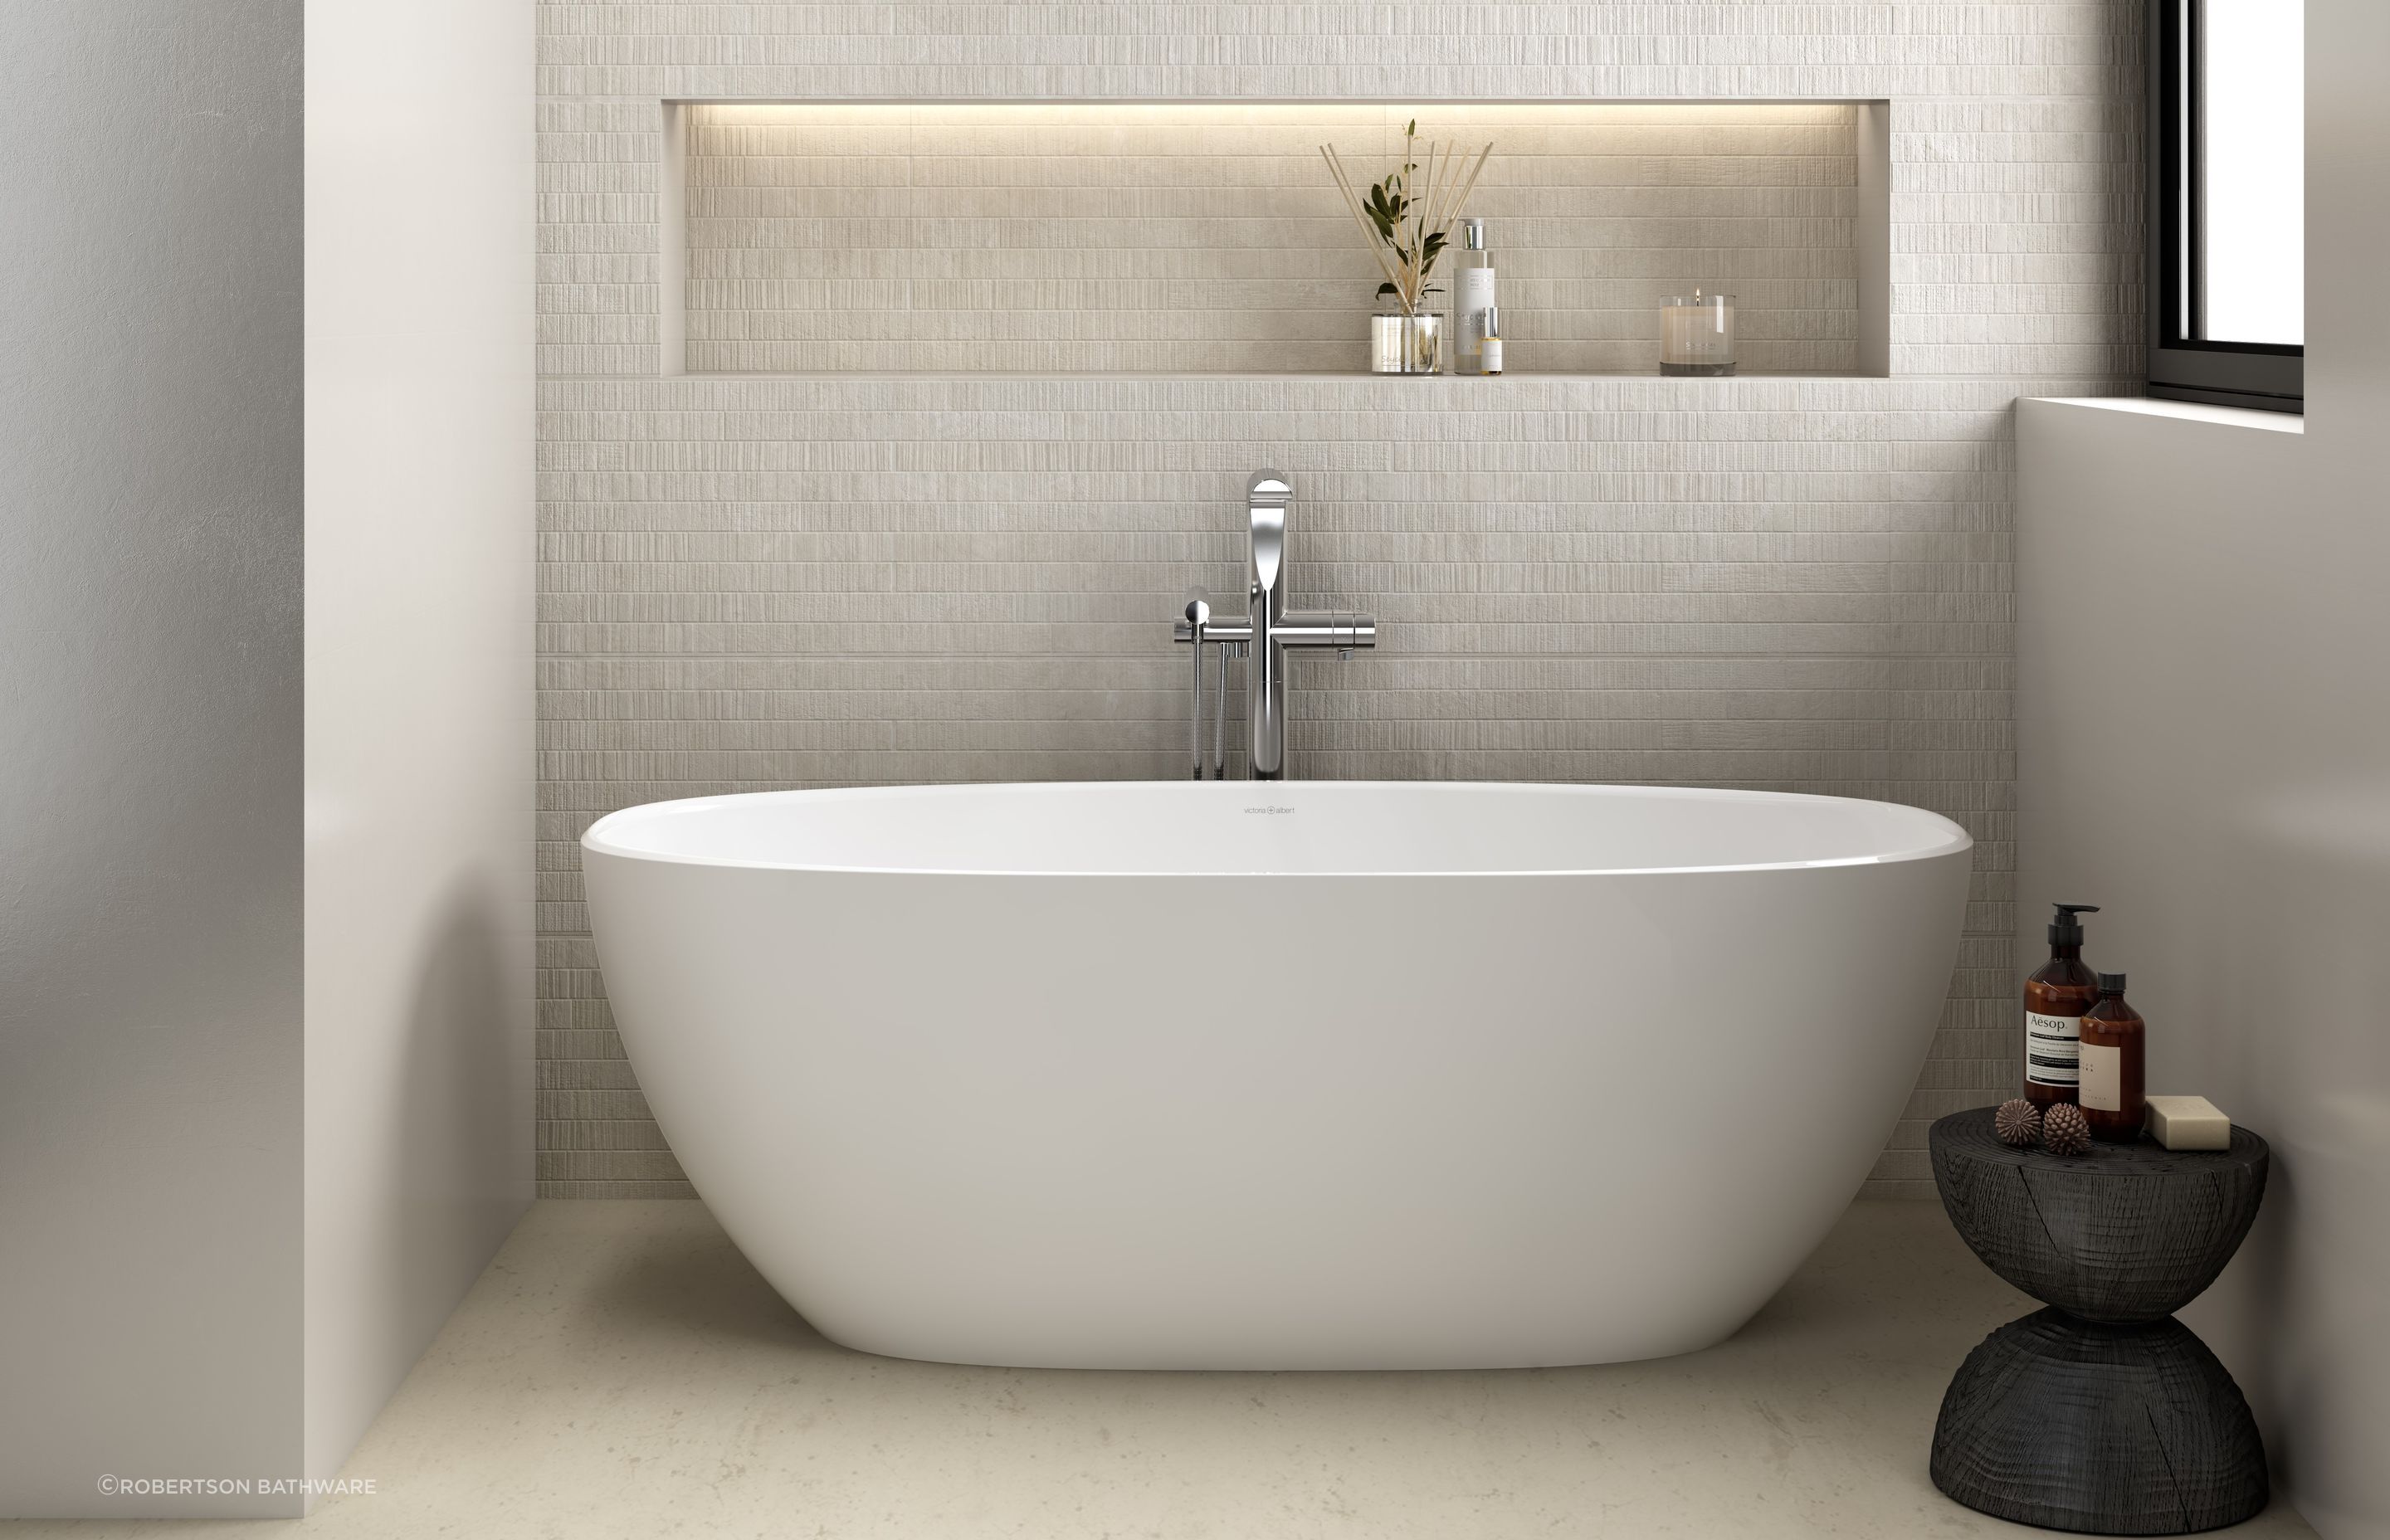 High-quality freestanding baths like the Victoria + Albert Barcelona Bath should be viewed as a long term investment